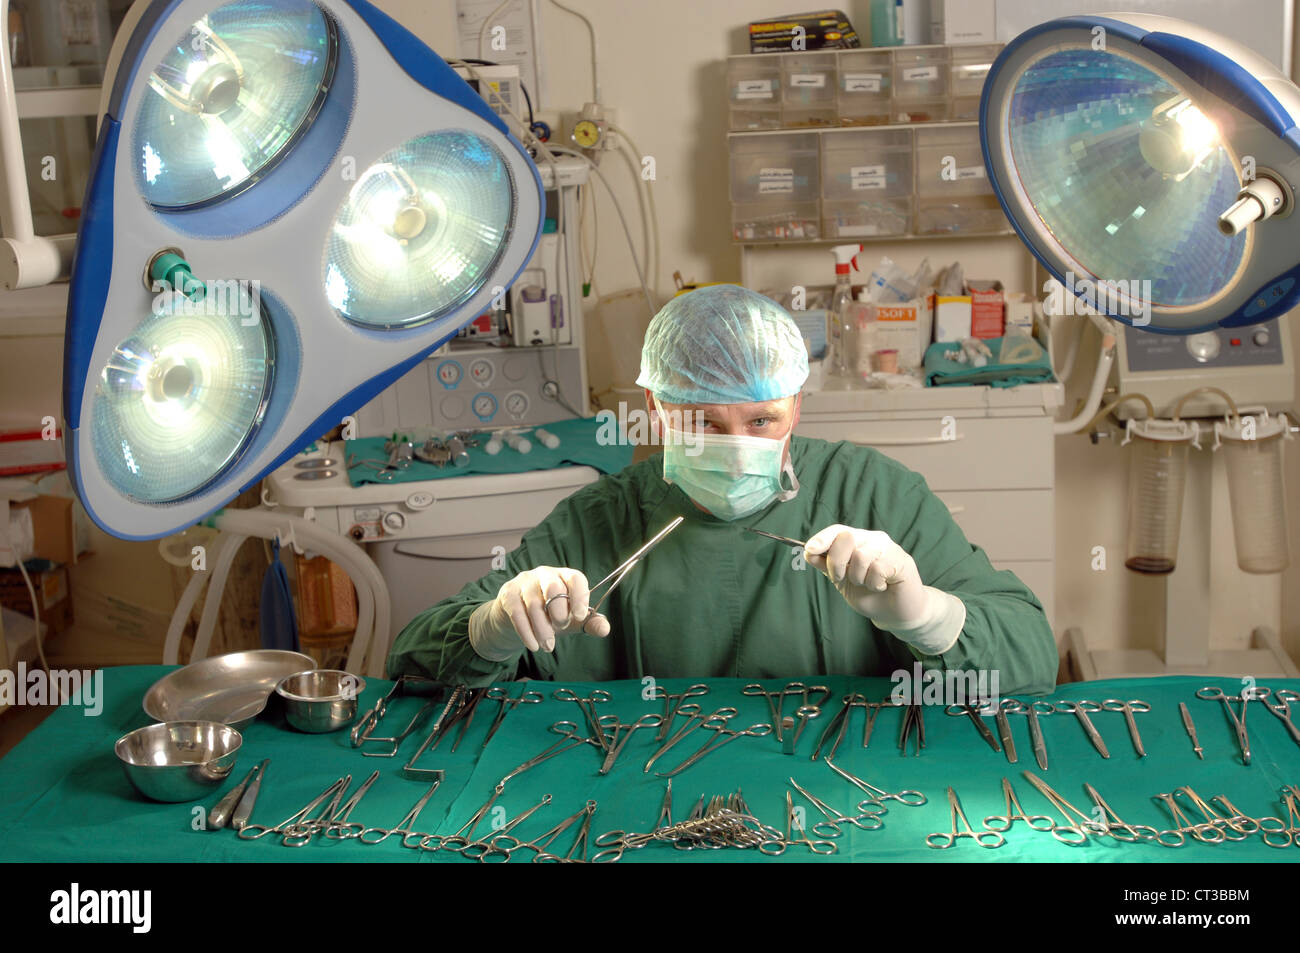 A surgeon in complete surgical dress brandishing surgical tools in an operating theatre. Stock Photo